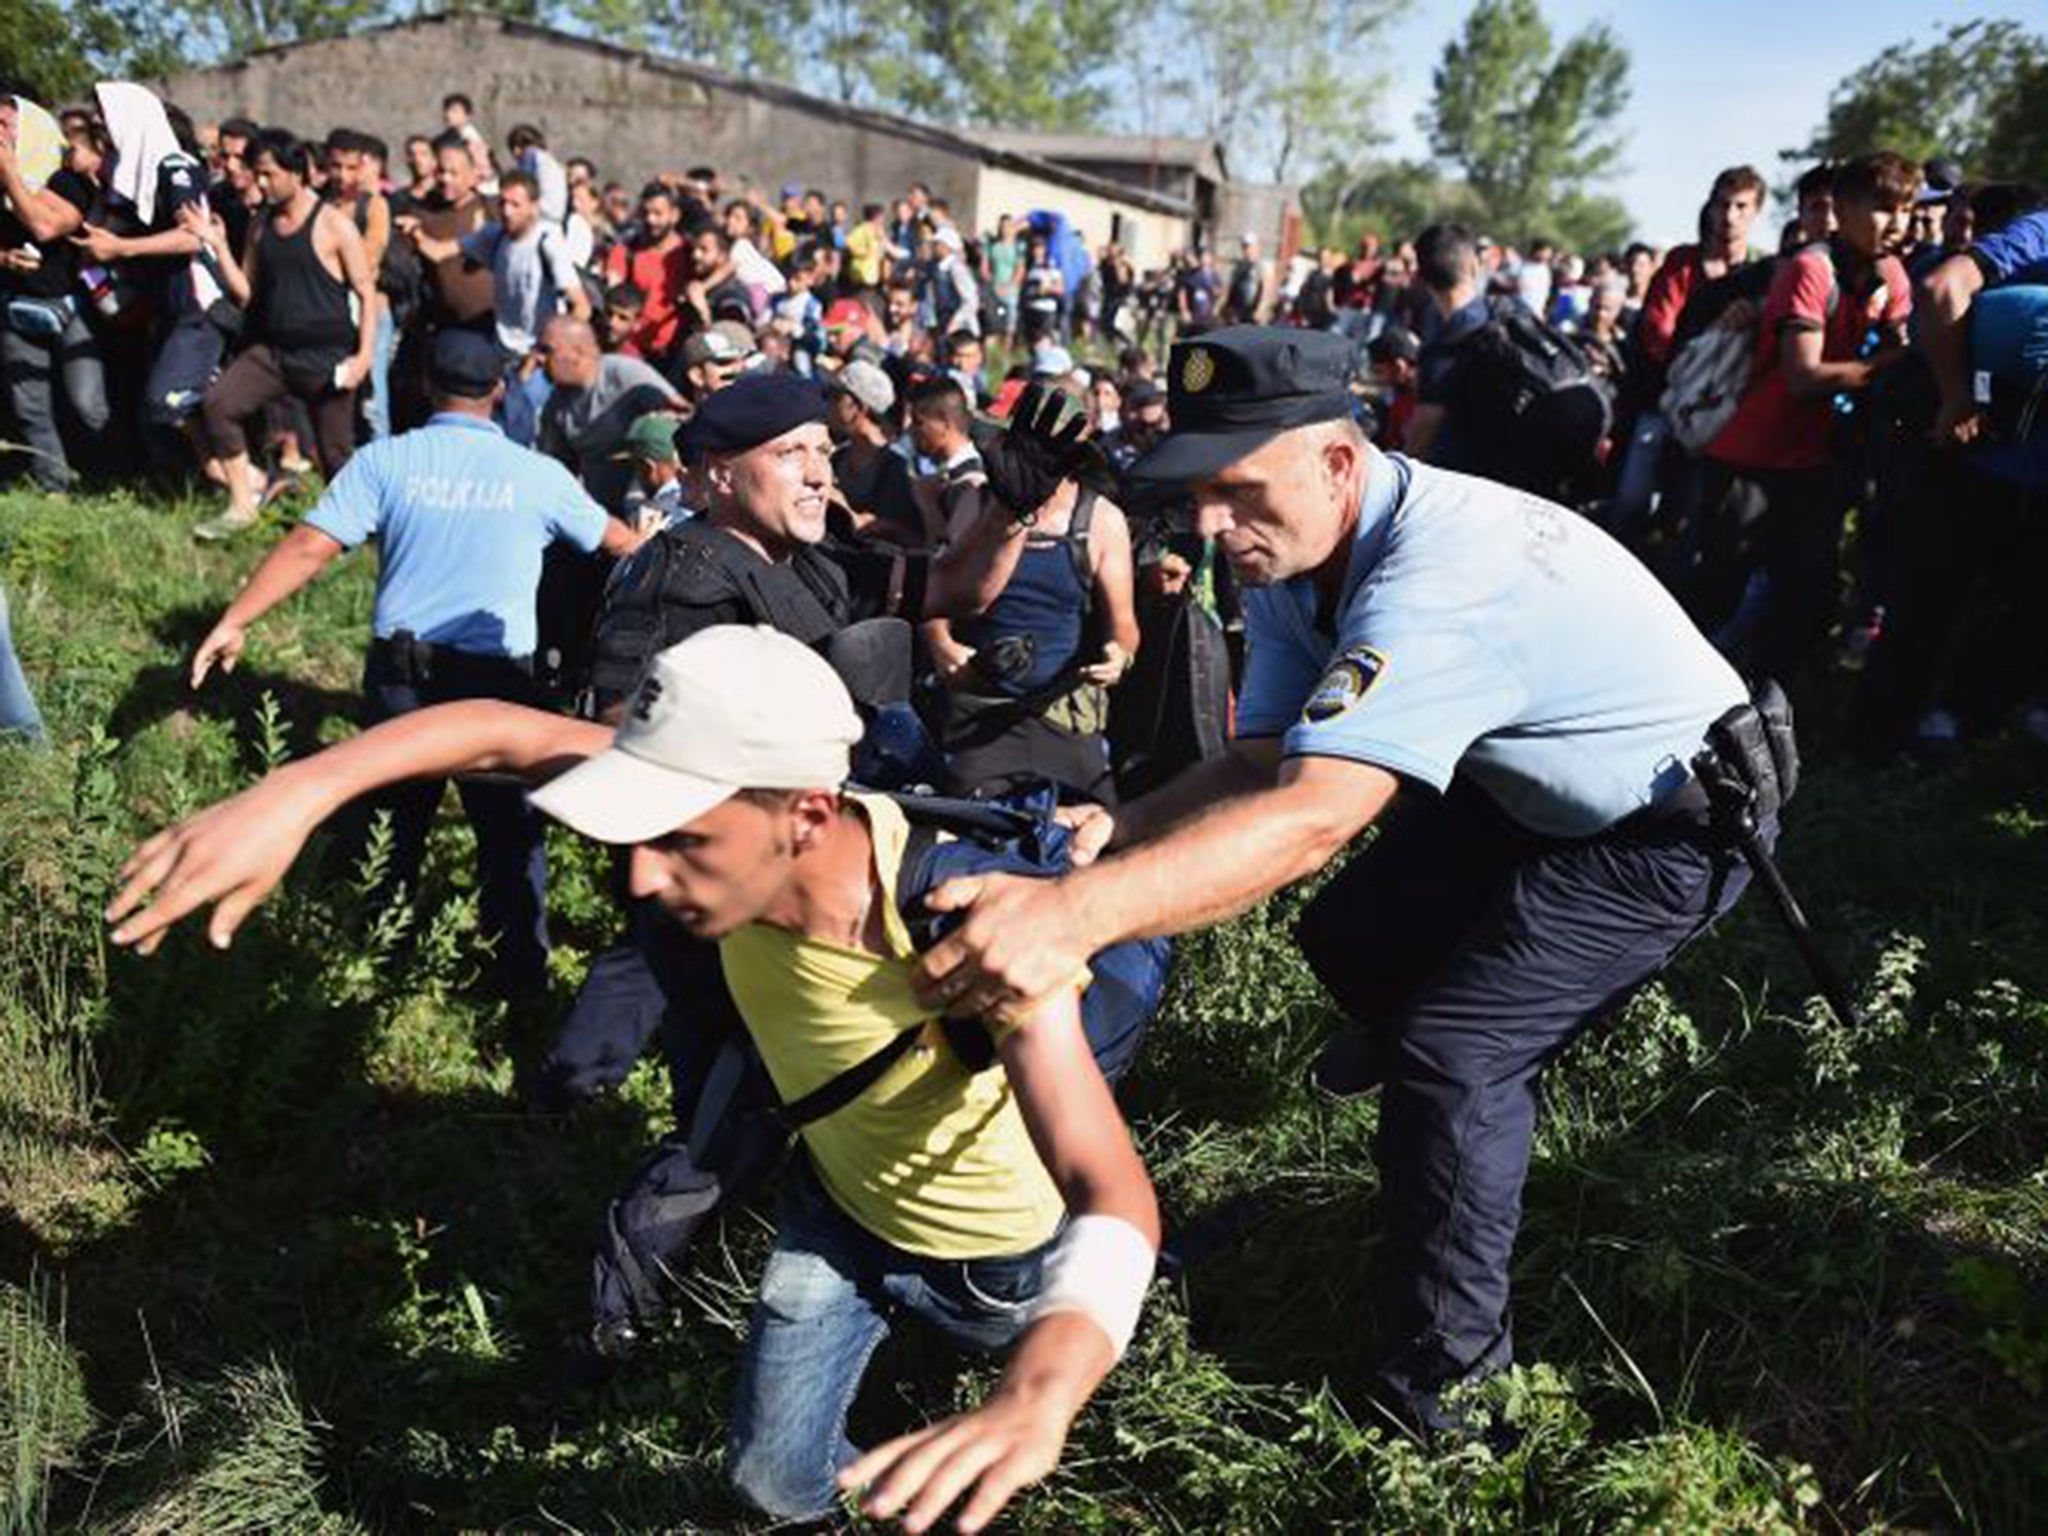 Serbia's border with Croatia has become the latest flashpoint in Europe's refugee crisis